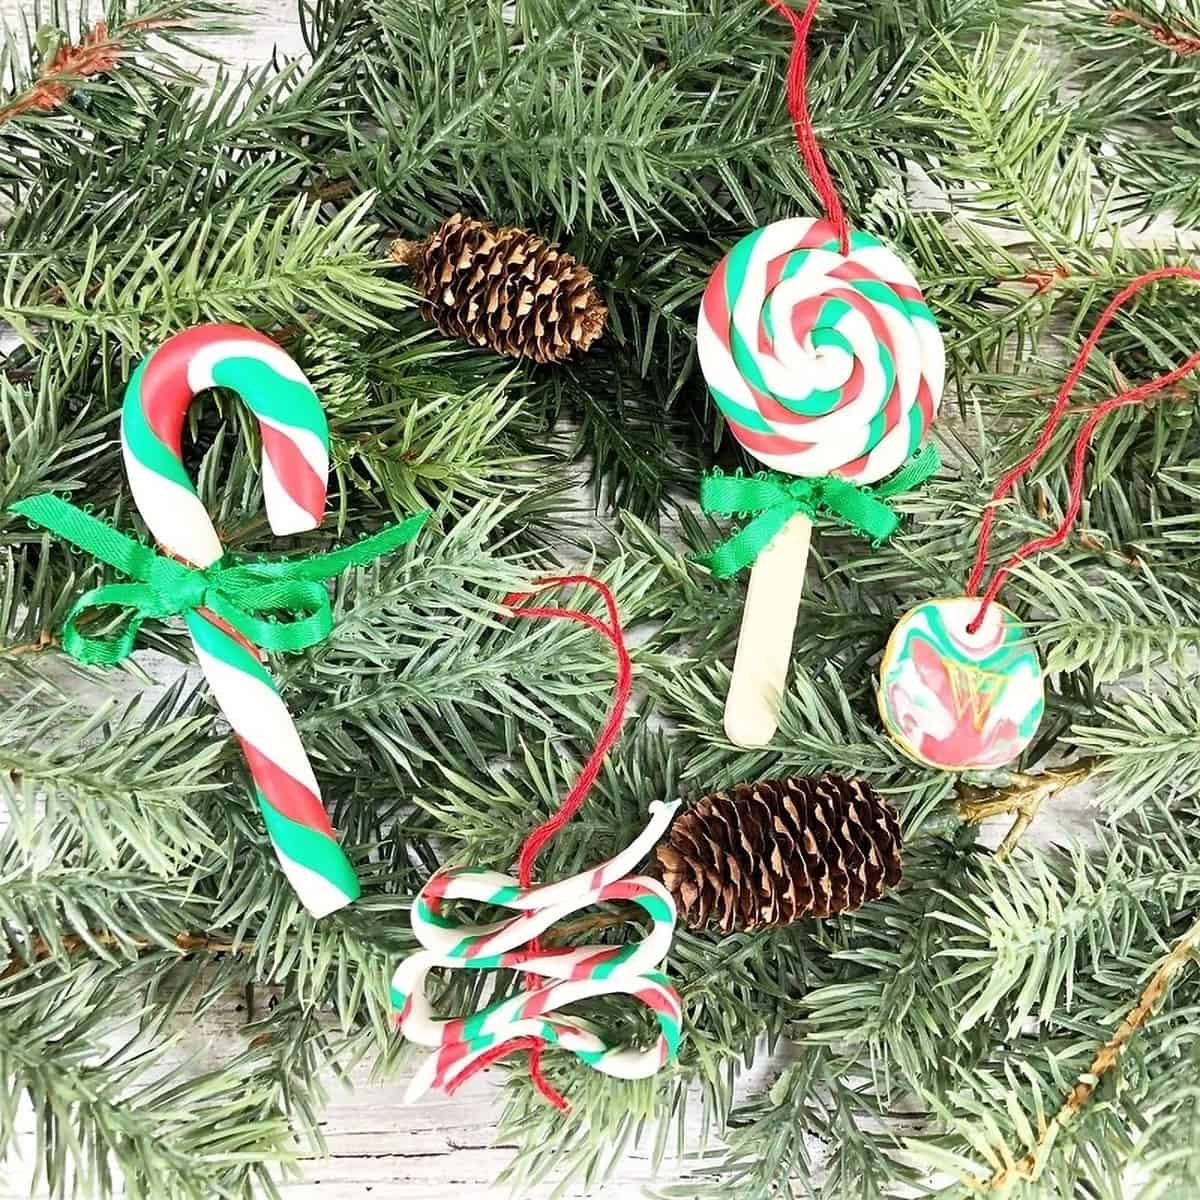 Four red, green, and white candy-cane style polymer clay Christmas tree ornaments including: a taffy style ribbon, a lollipop swirl on a stick, a traditional candy cane style, and a marbled disc.